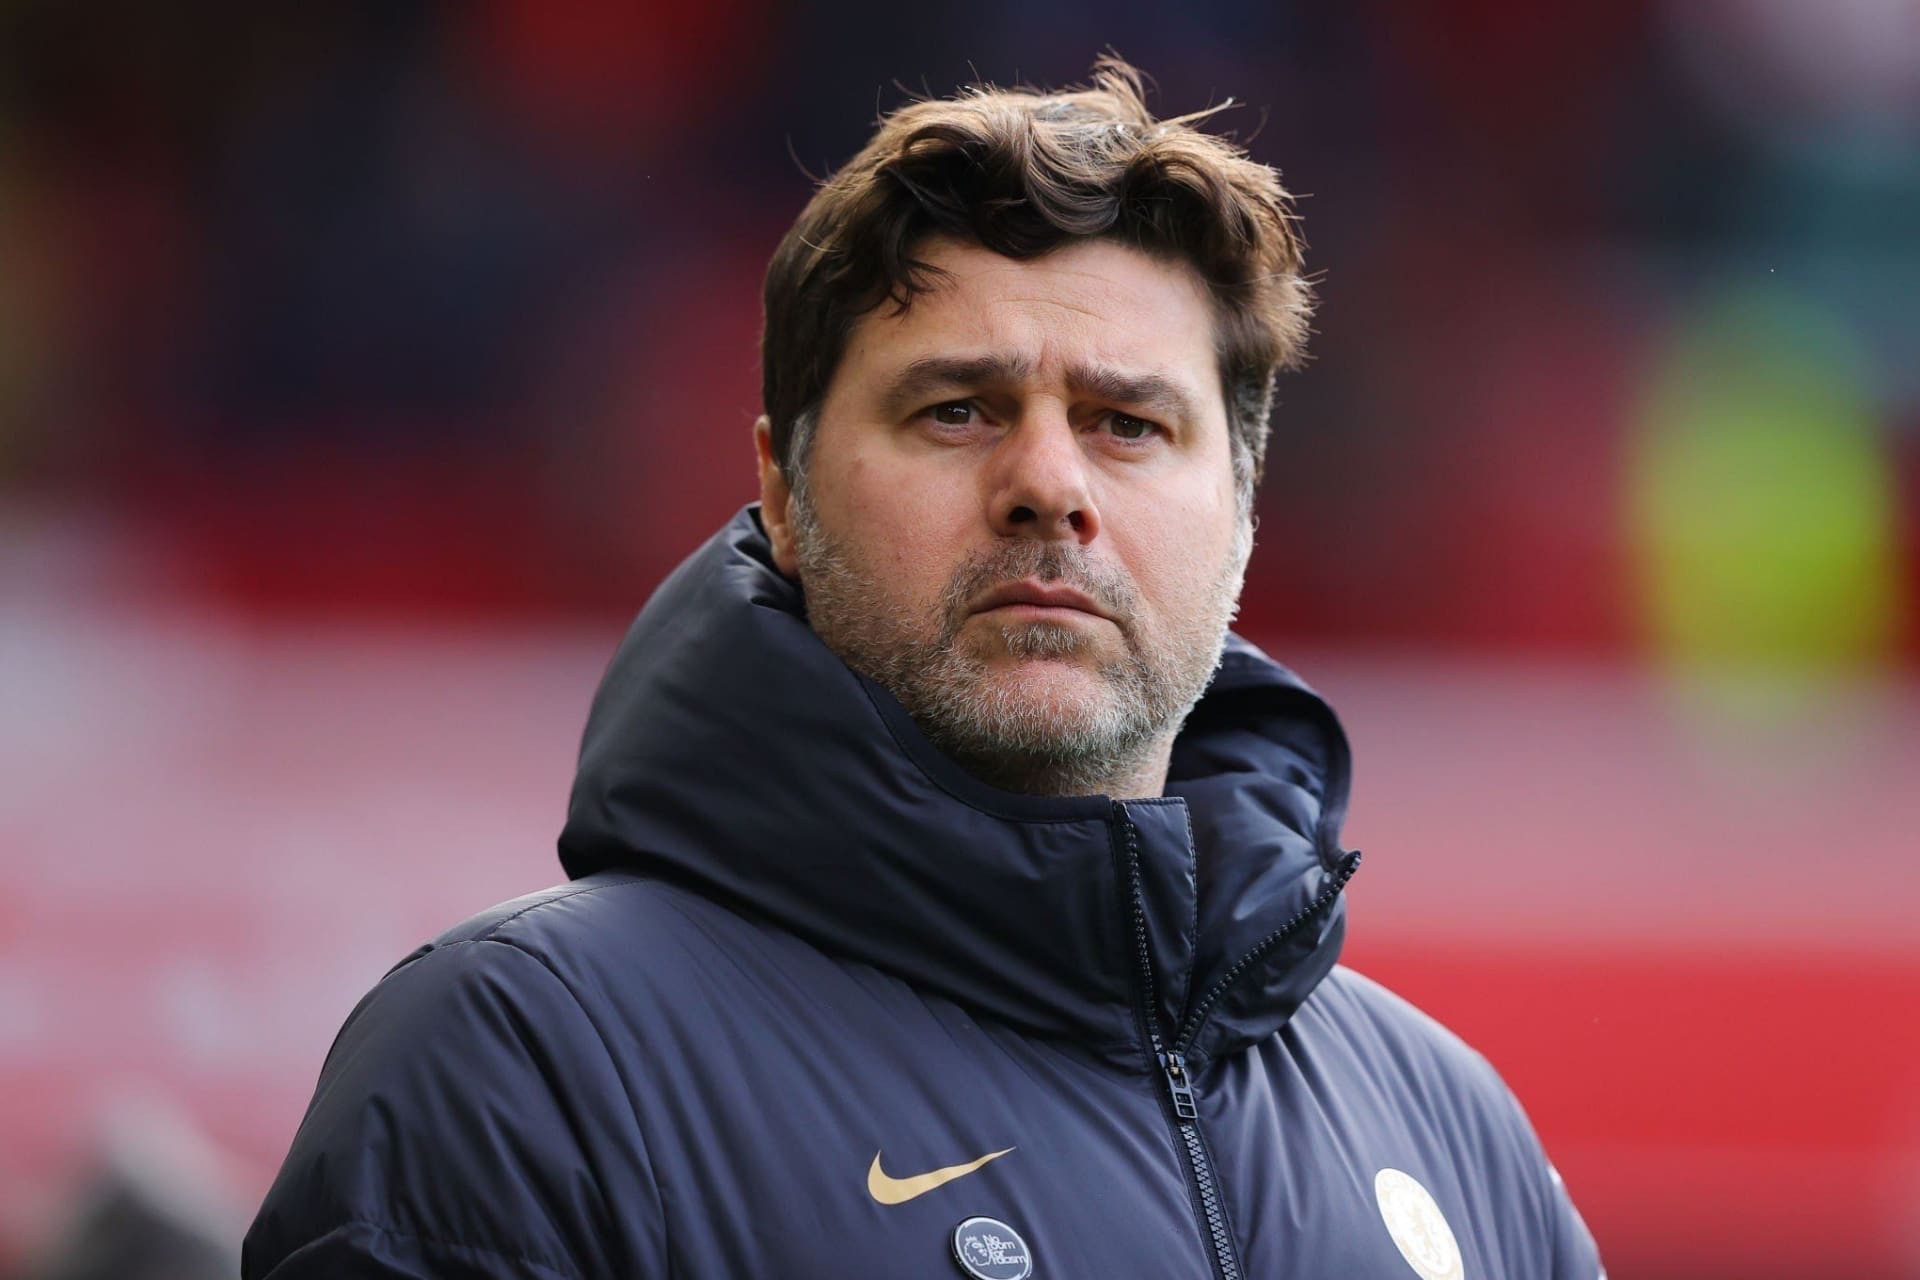 "It's not Palmer's football club" - Pochettino makes demand of Chelsea players against Arsenal 